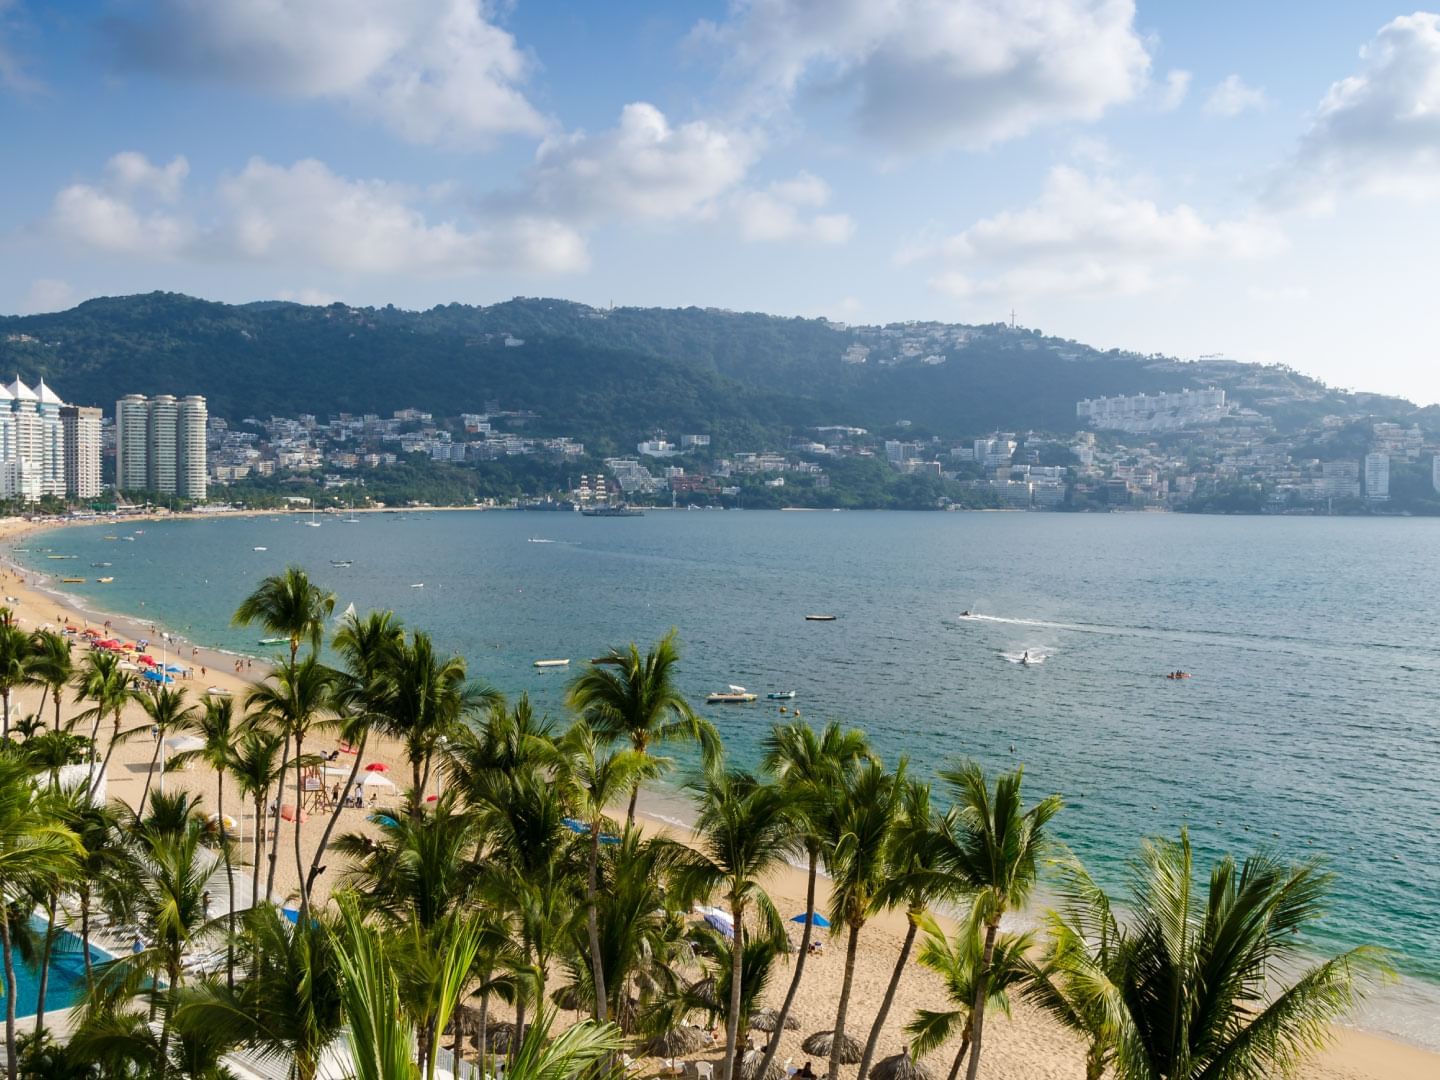 A beach line with palm trees in the Acapulco beach resort town